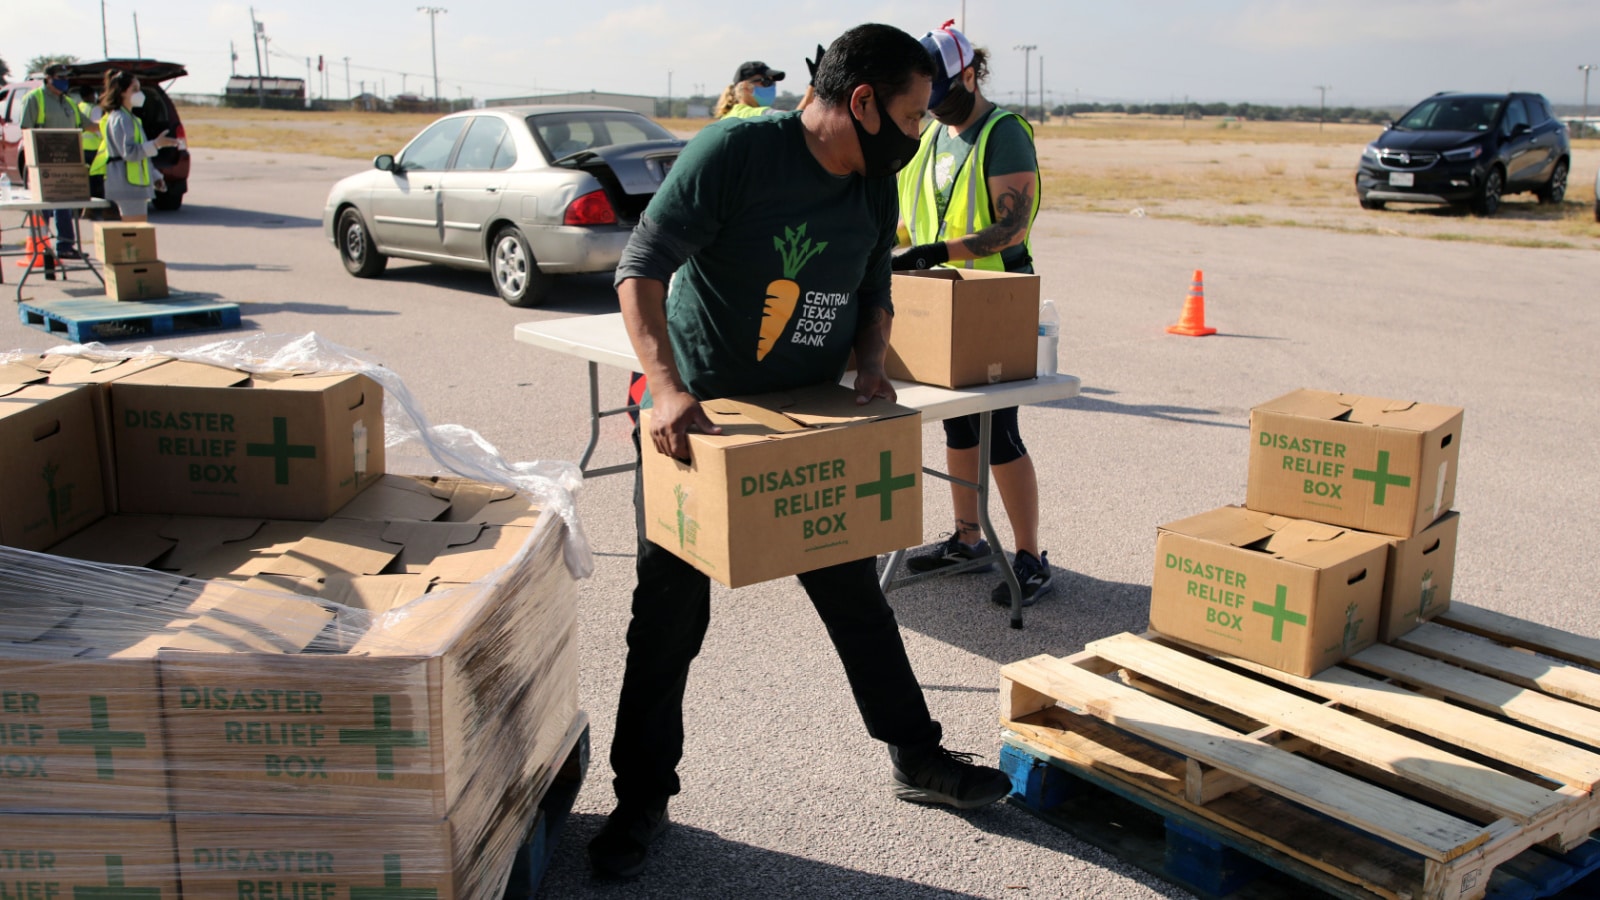 Austin, TX / USA - Nov. 19, 2020: One week before Thanksgiving, an employee of the Central Texas Food Bank transfers Disaster Relief boxes for distribution to people in need.